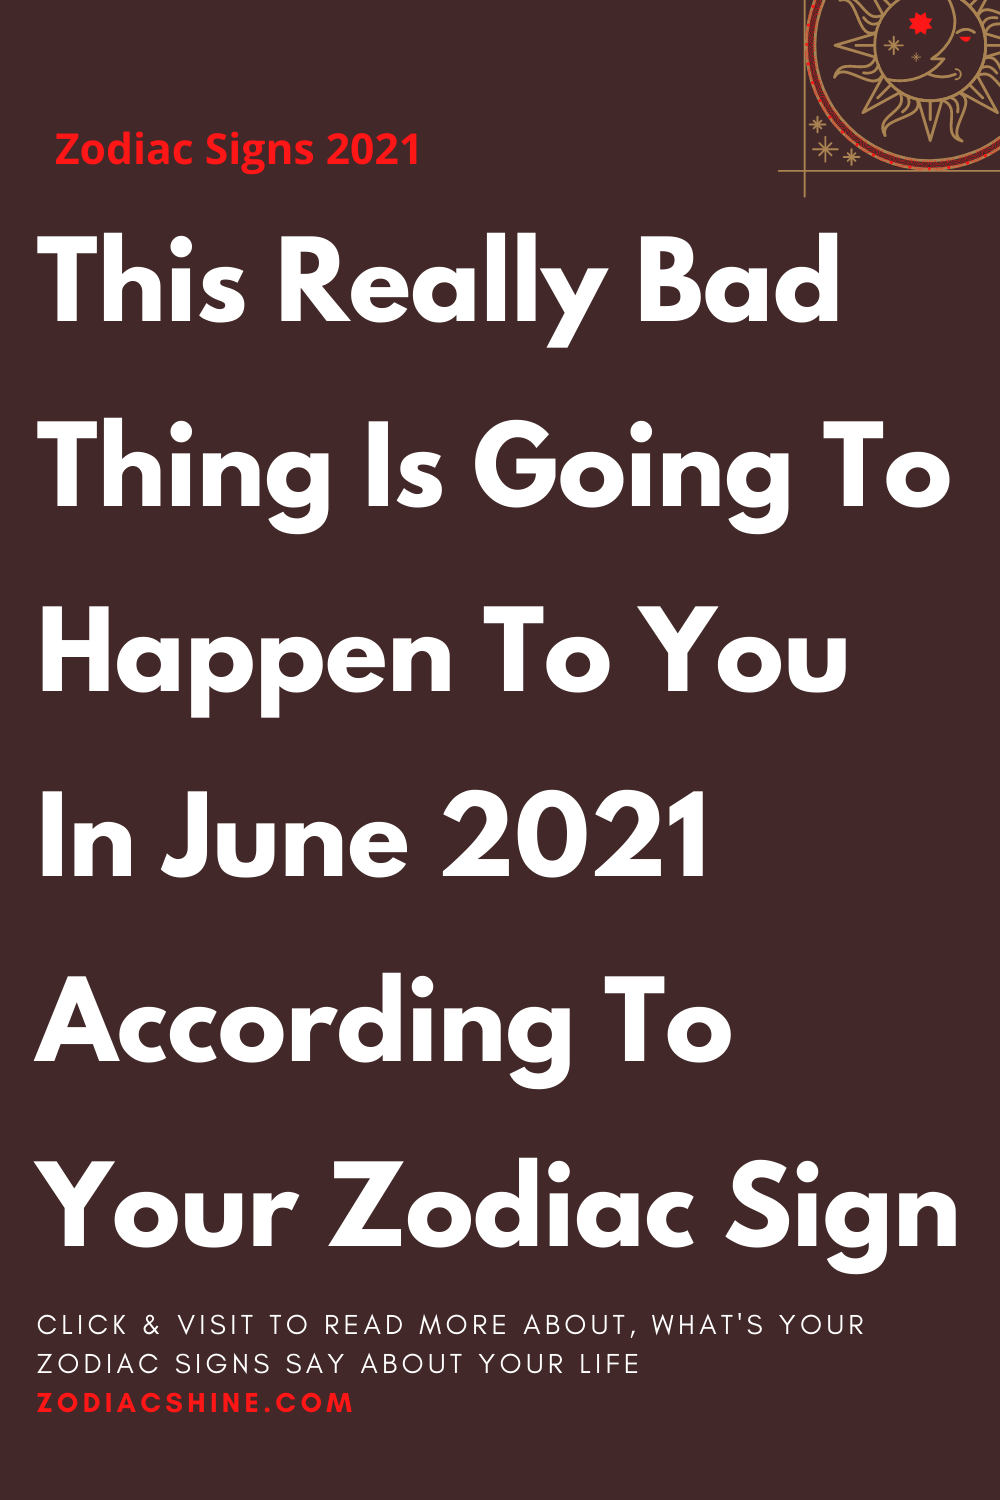 This Really Bad Thing Is Going To Happen To You In June 2021 According To Your Zodiac Sign